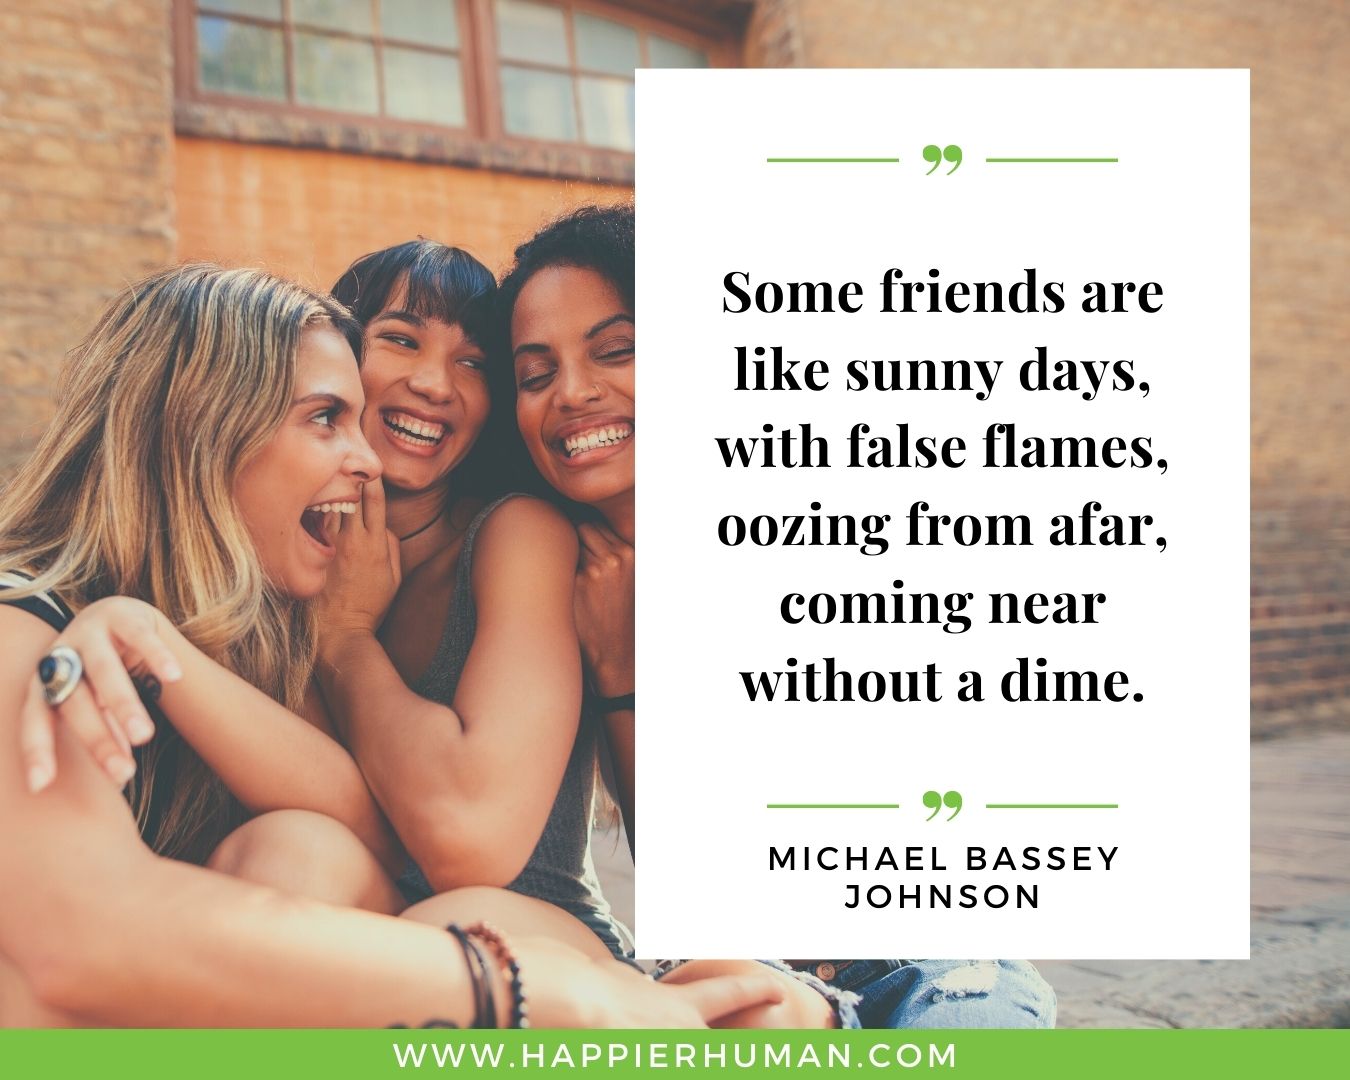 Haters Quotes - “Some friends are like sunny days, with false flames, oozing from afar, coming near without a dime.” - Michael Bassey Johnson